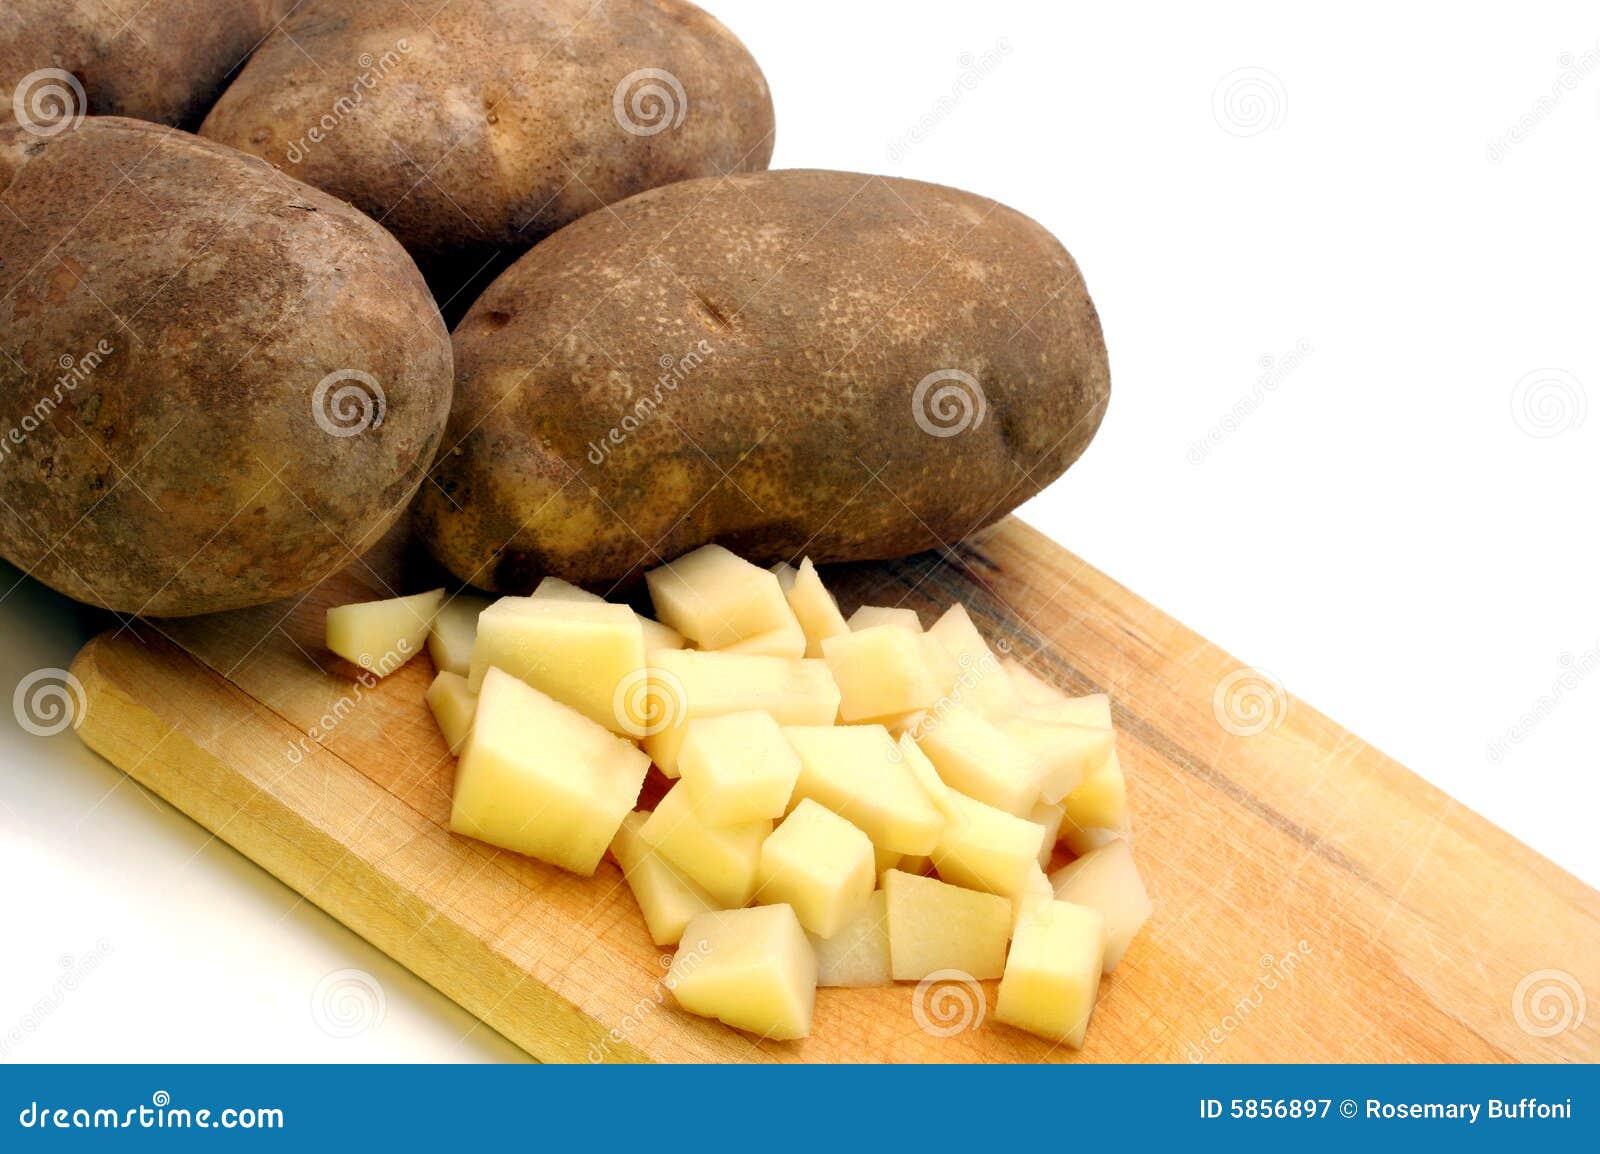 russet potatoes whole and sliced